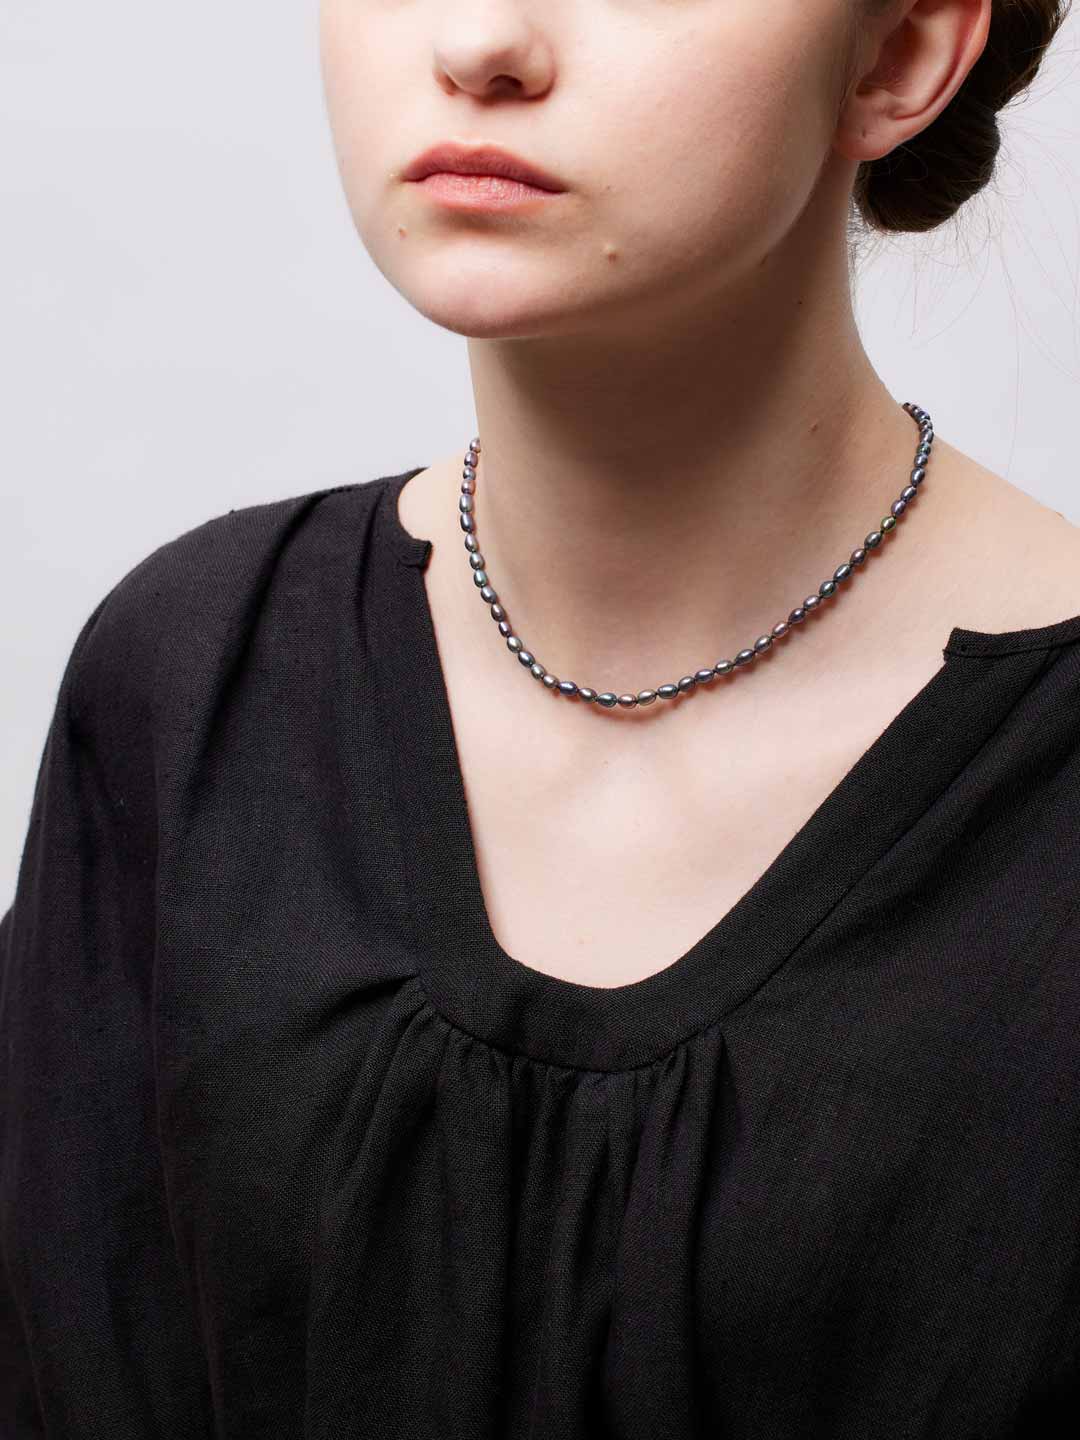 Tiny Black Pearl Collar Necklace - Silver